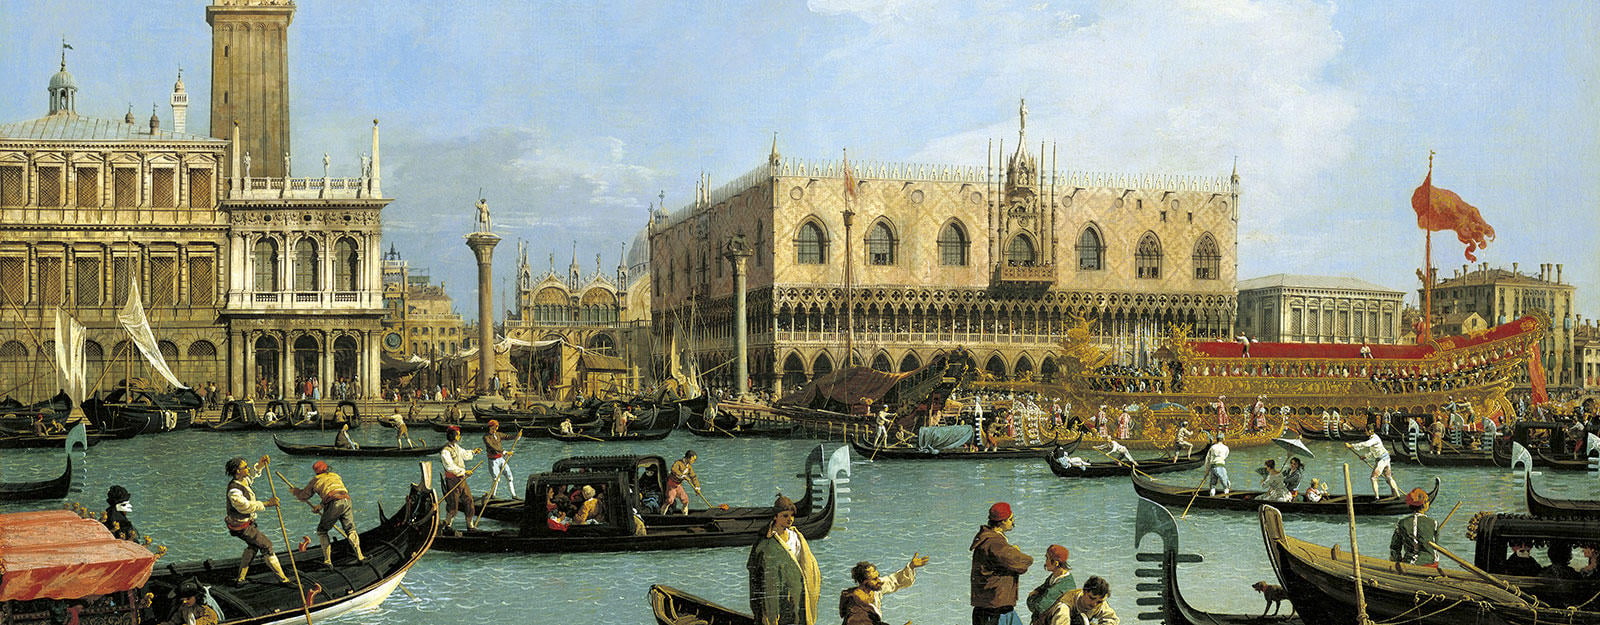 5 canaletto-1600